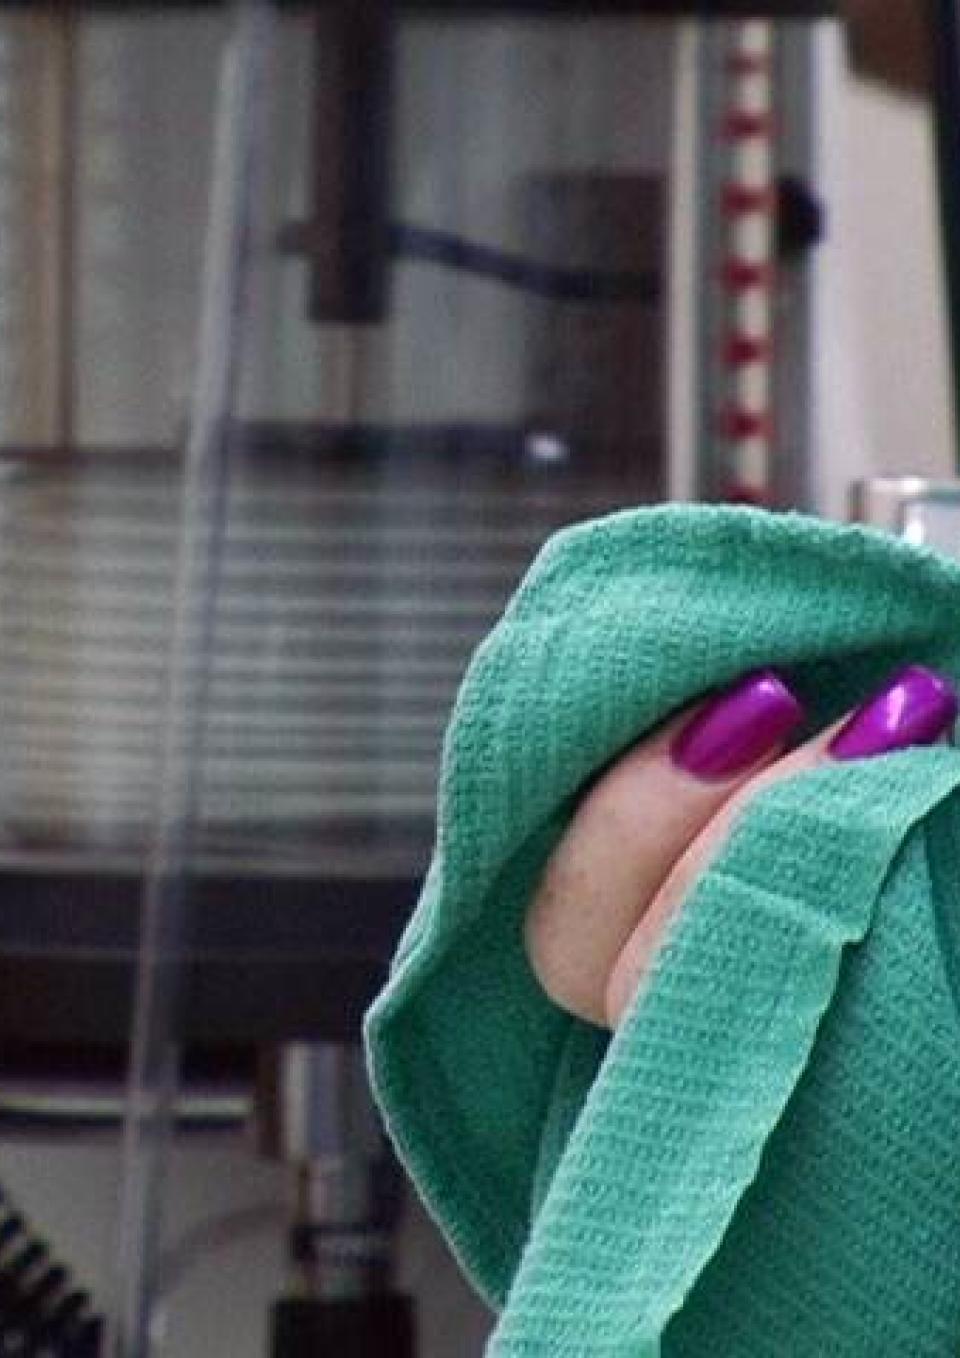 A still from the New Day film Trinidad. A close up of two bright purple nails holding a bright teal cloth. Factory machines fill the blurred background.